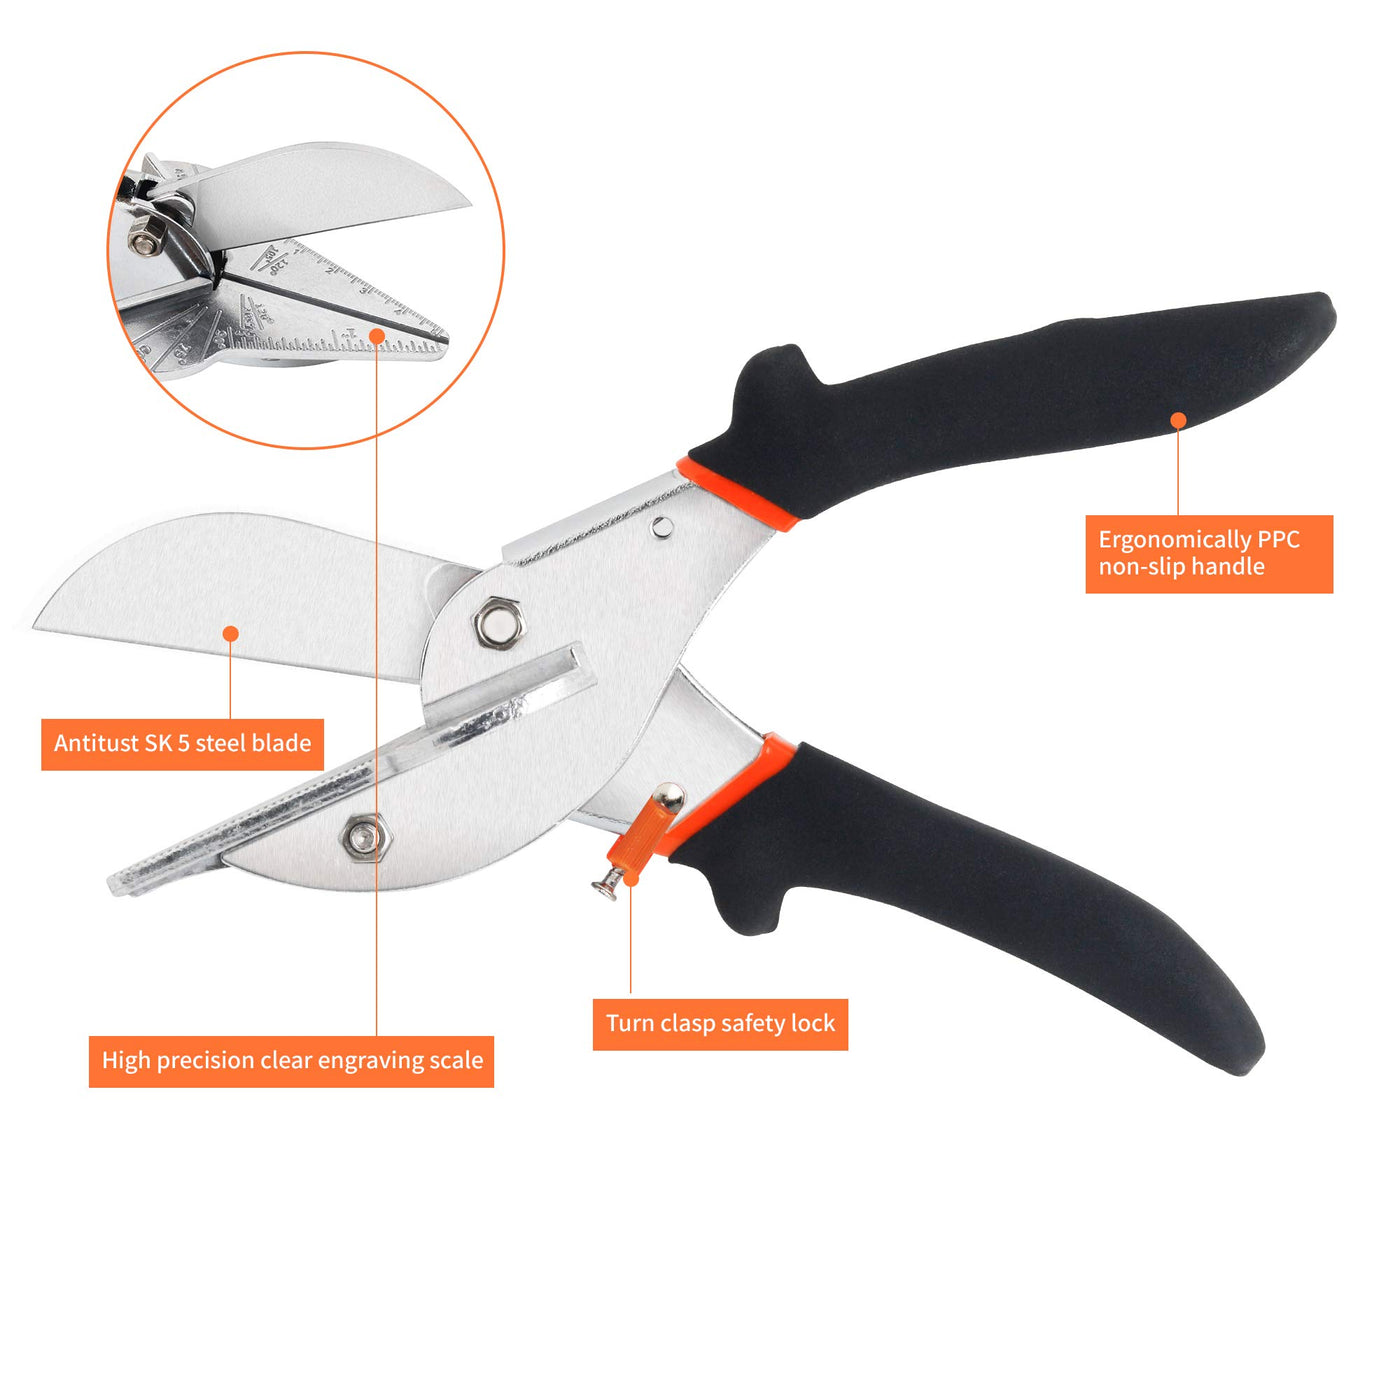 GARTOL Miter Shears- Multifunctional Trunking Shears for Angular Cutting of Moulding and Trim, Adjustable at 45 to 135 Degree, Hand Tools for Cutting